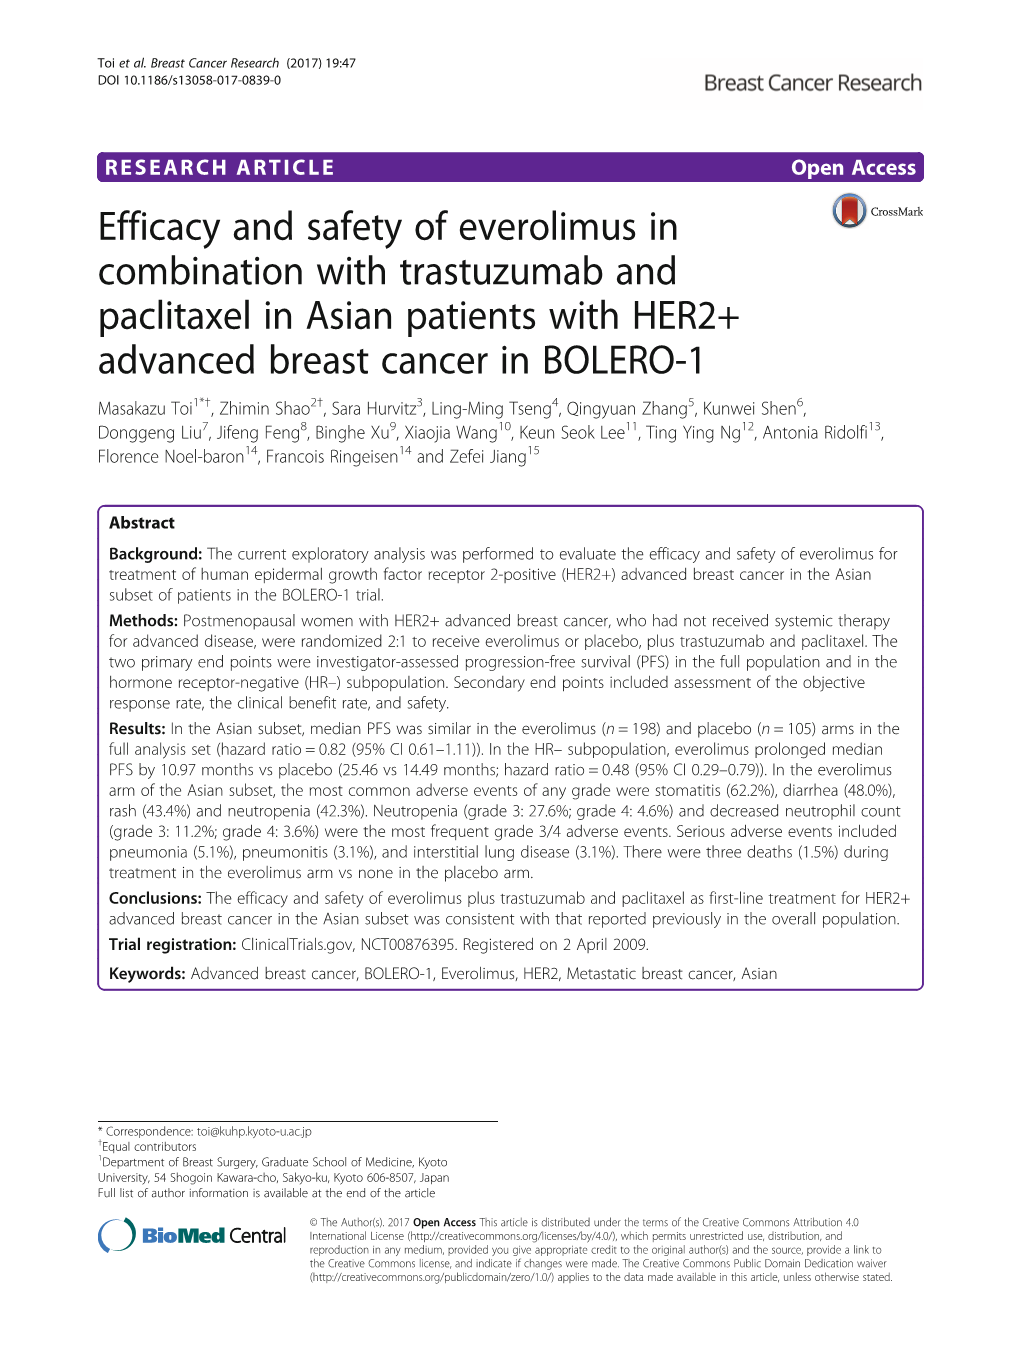 Efficacy and Safety of Everolimus in Combination with Trastuzumab and Paclitaxel in Asian Patients with HER2+ Advanced Breast Cancer in BOLERO-1